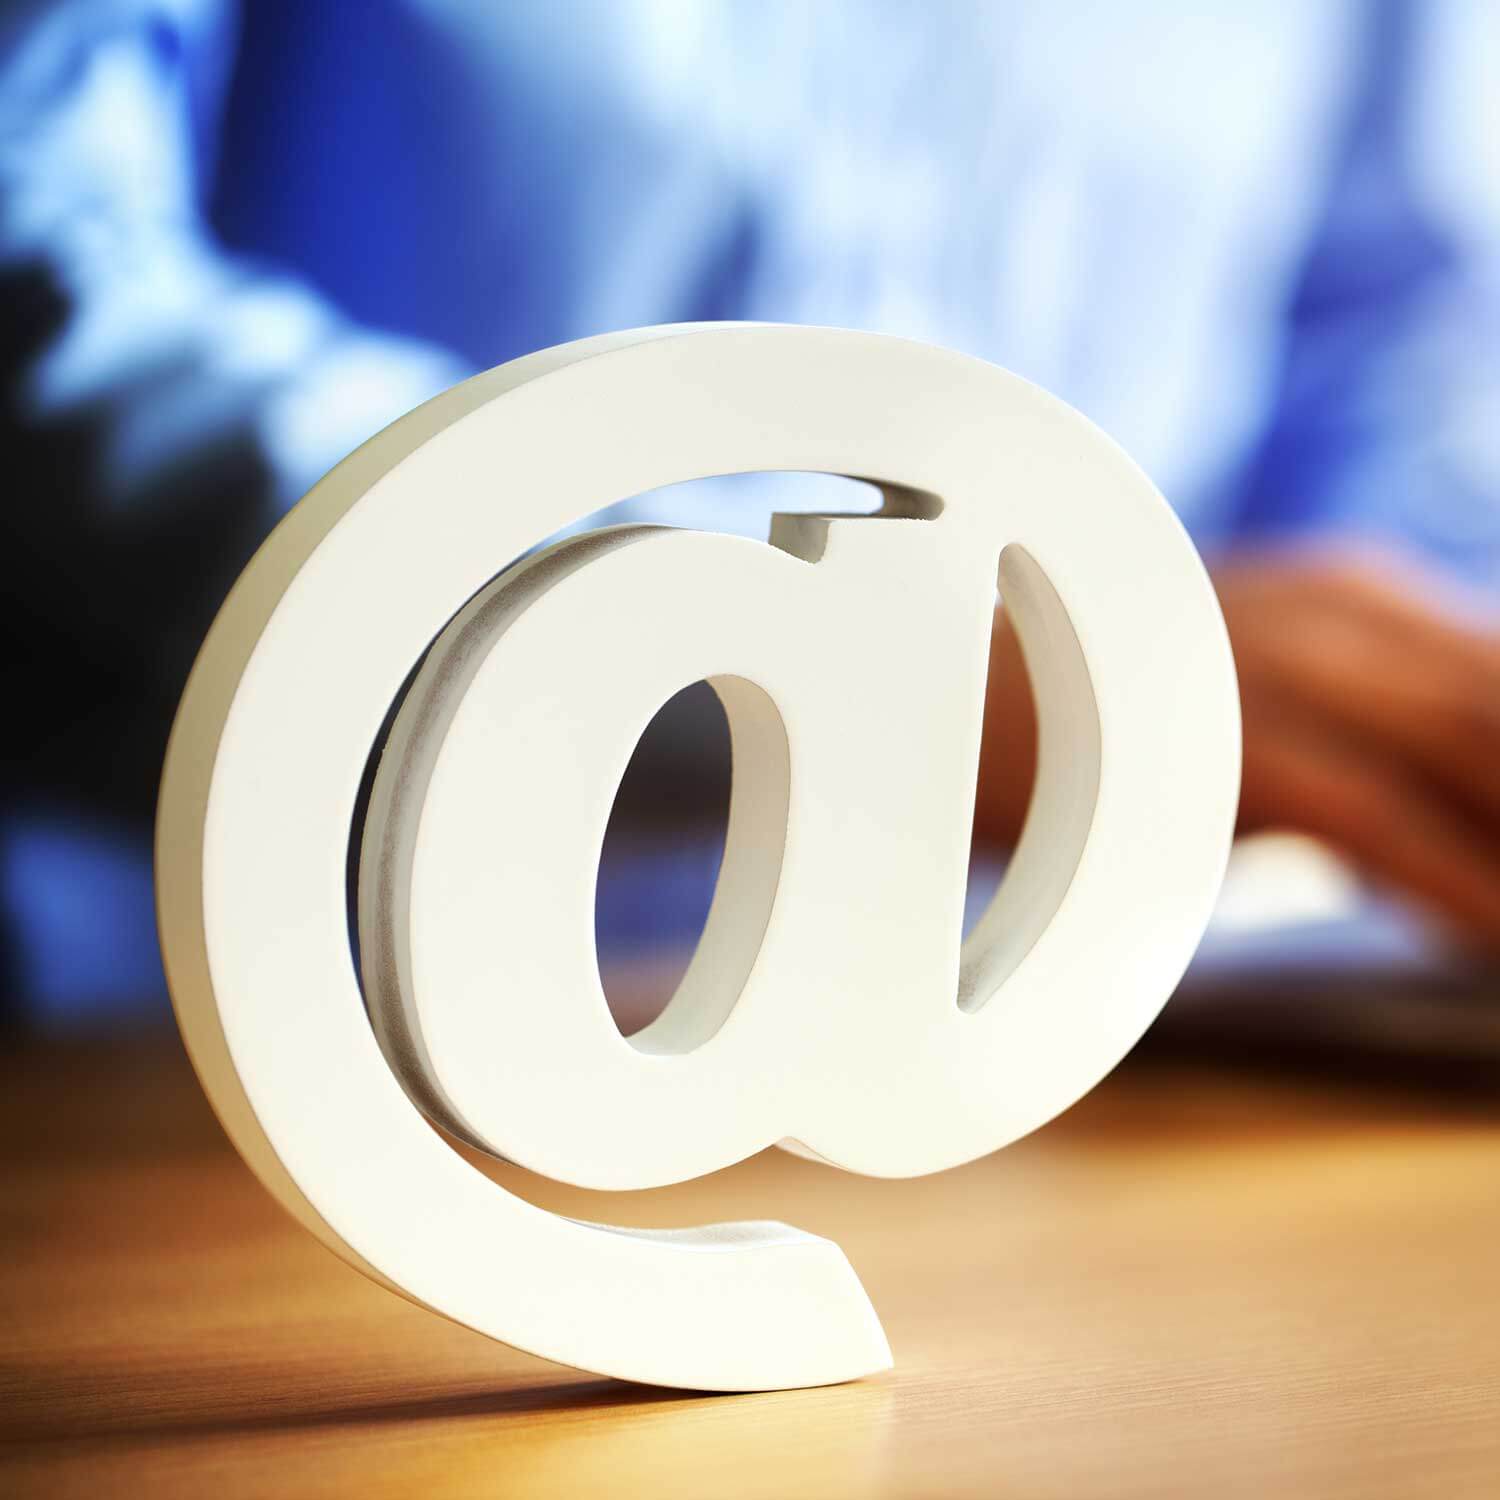 Why your business needs email marketing.